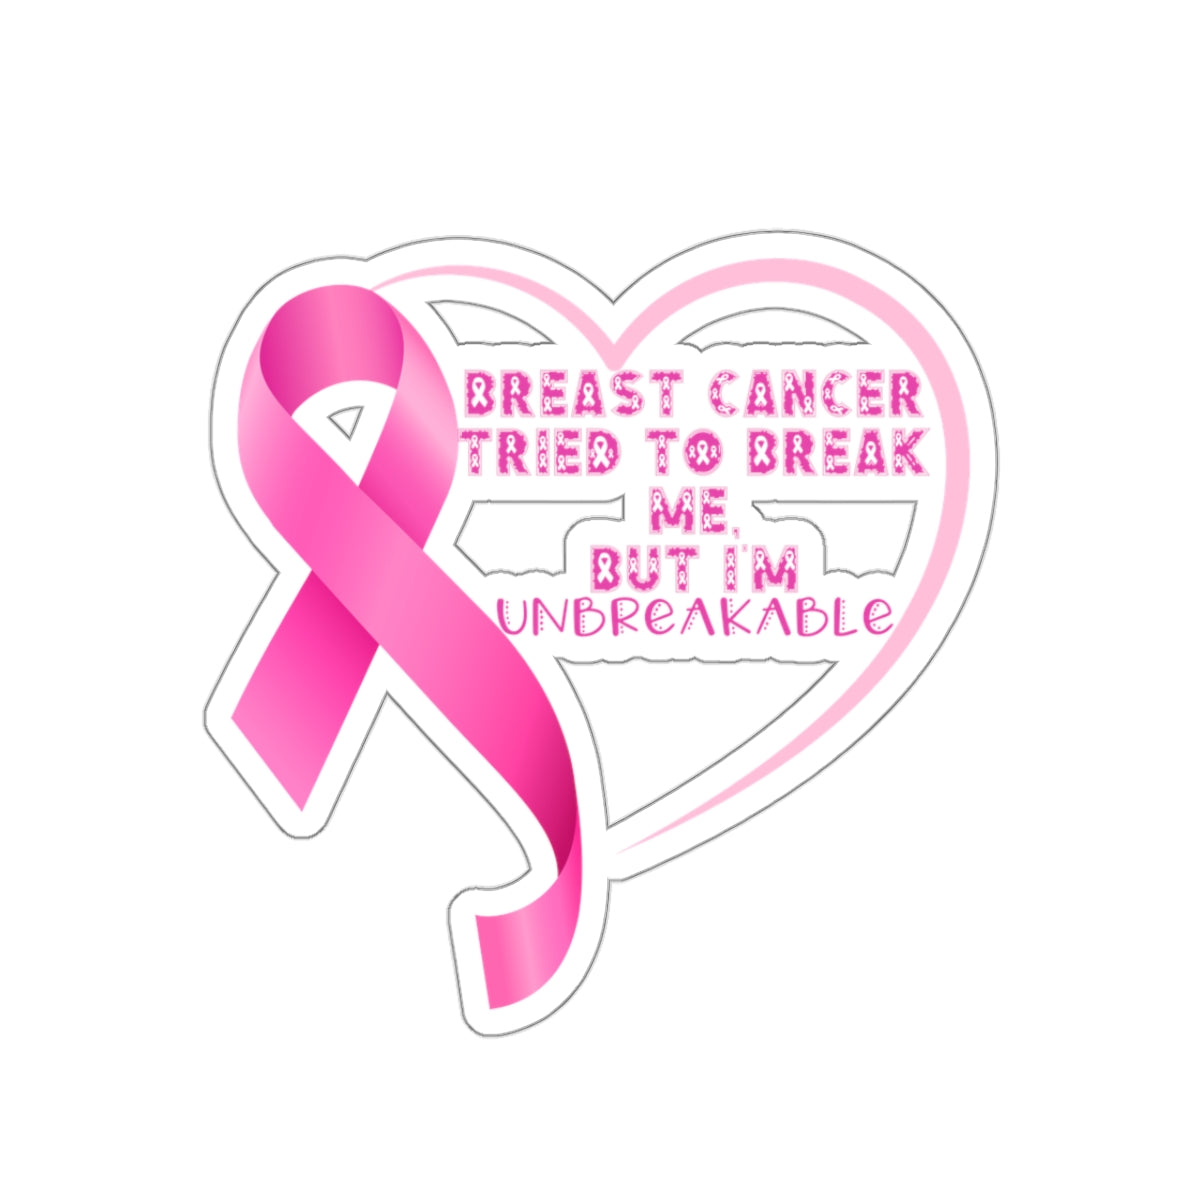 Breast Cancer Unbreakable Inspirational Quote Kiss-Cut Stickers-Paper products-3" × 3"-White-mysticalcherry